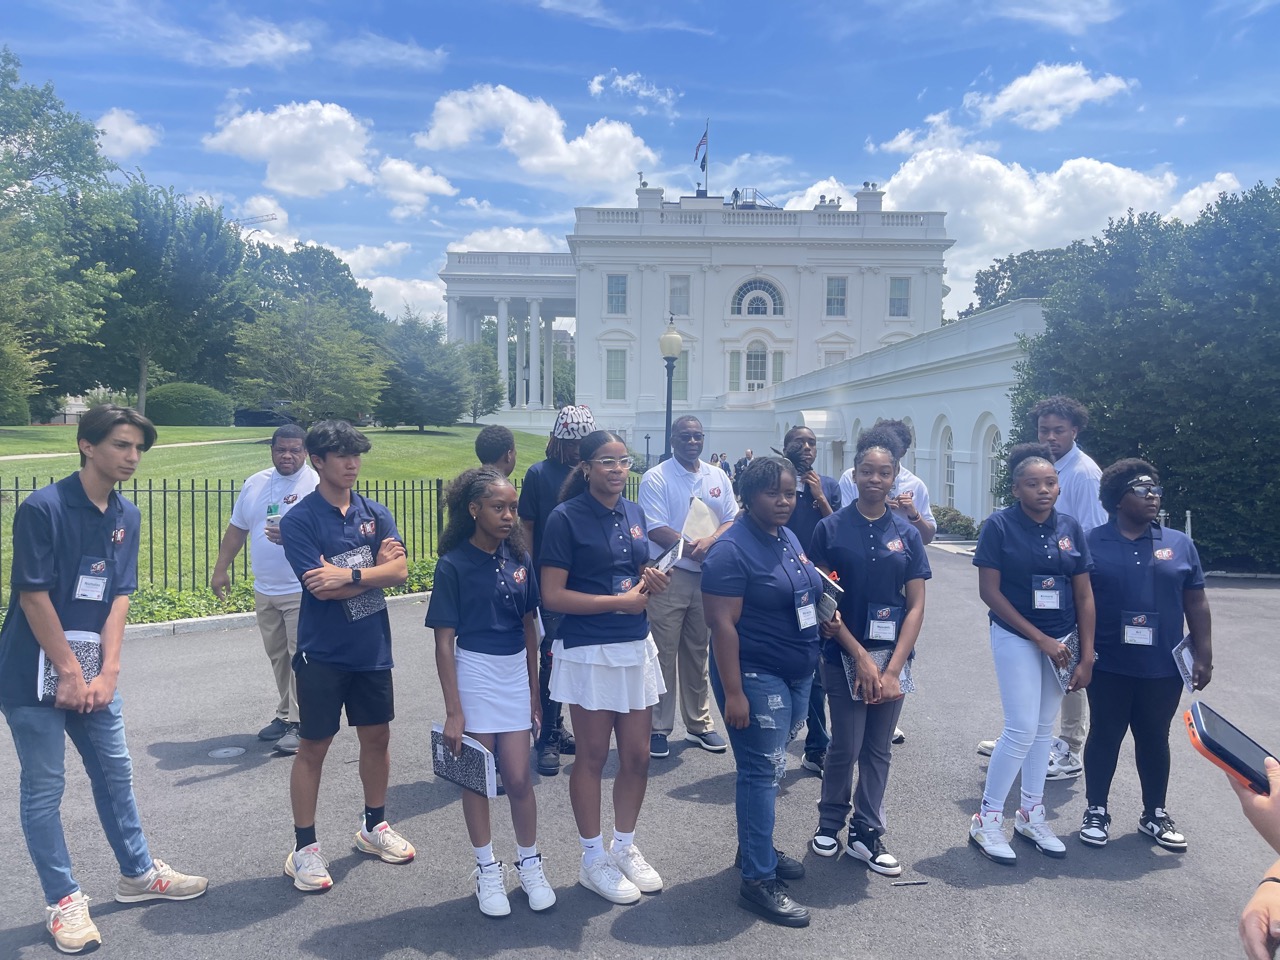 Children standing in front of the White House